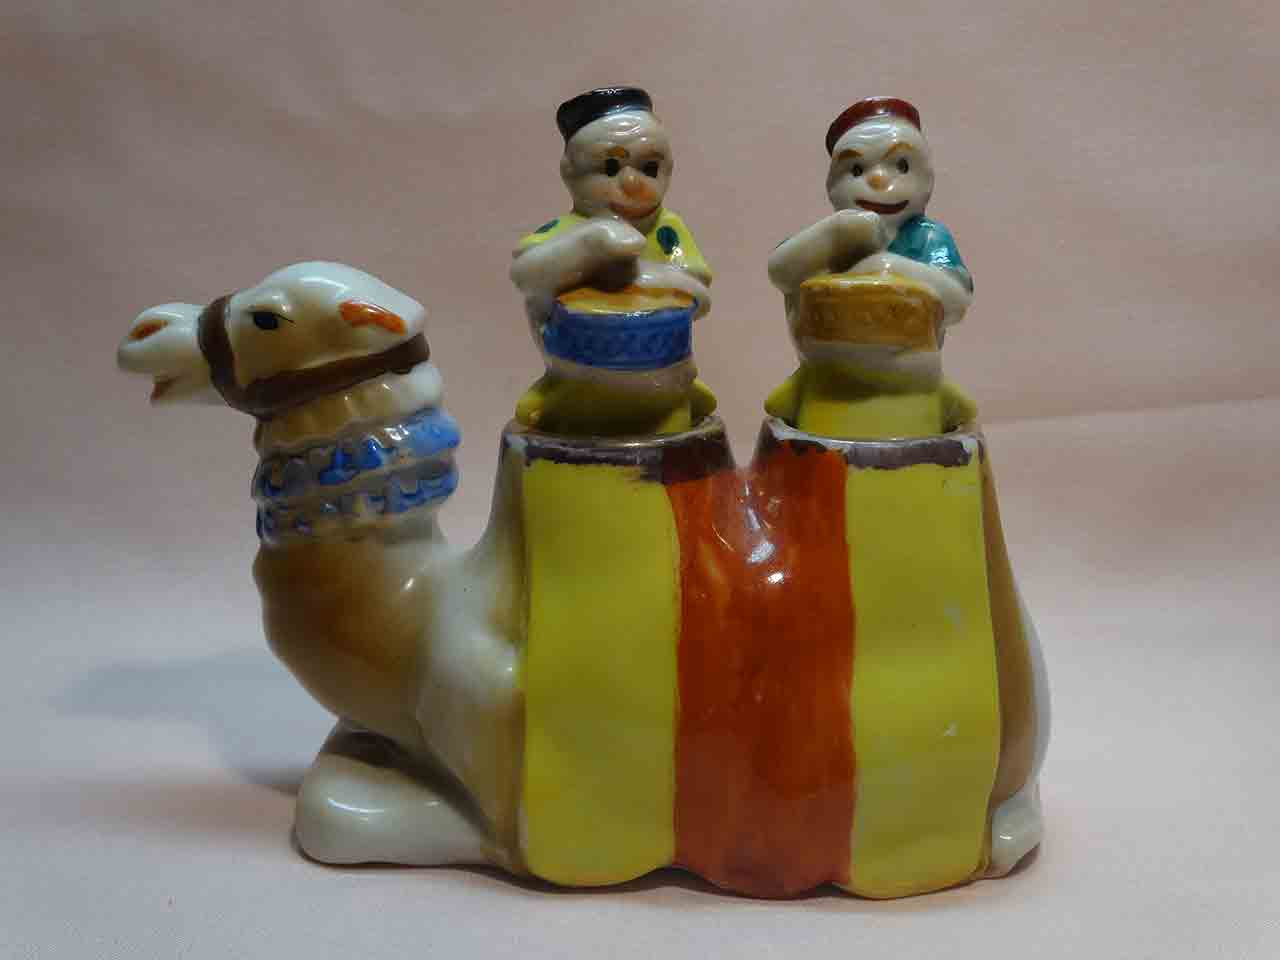 Camel nodder with monkeys as salt and pepper shakers